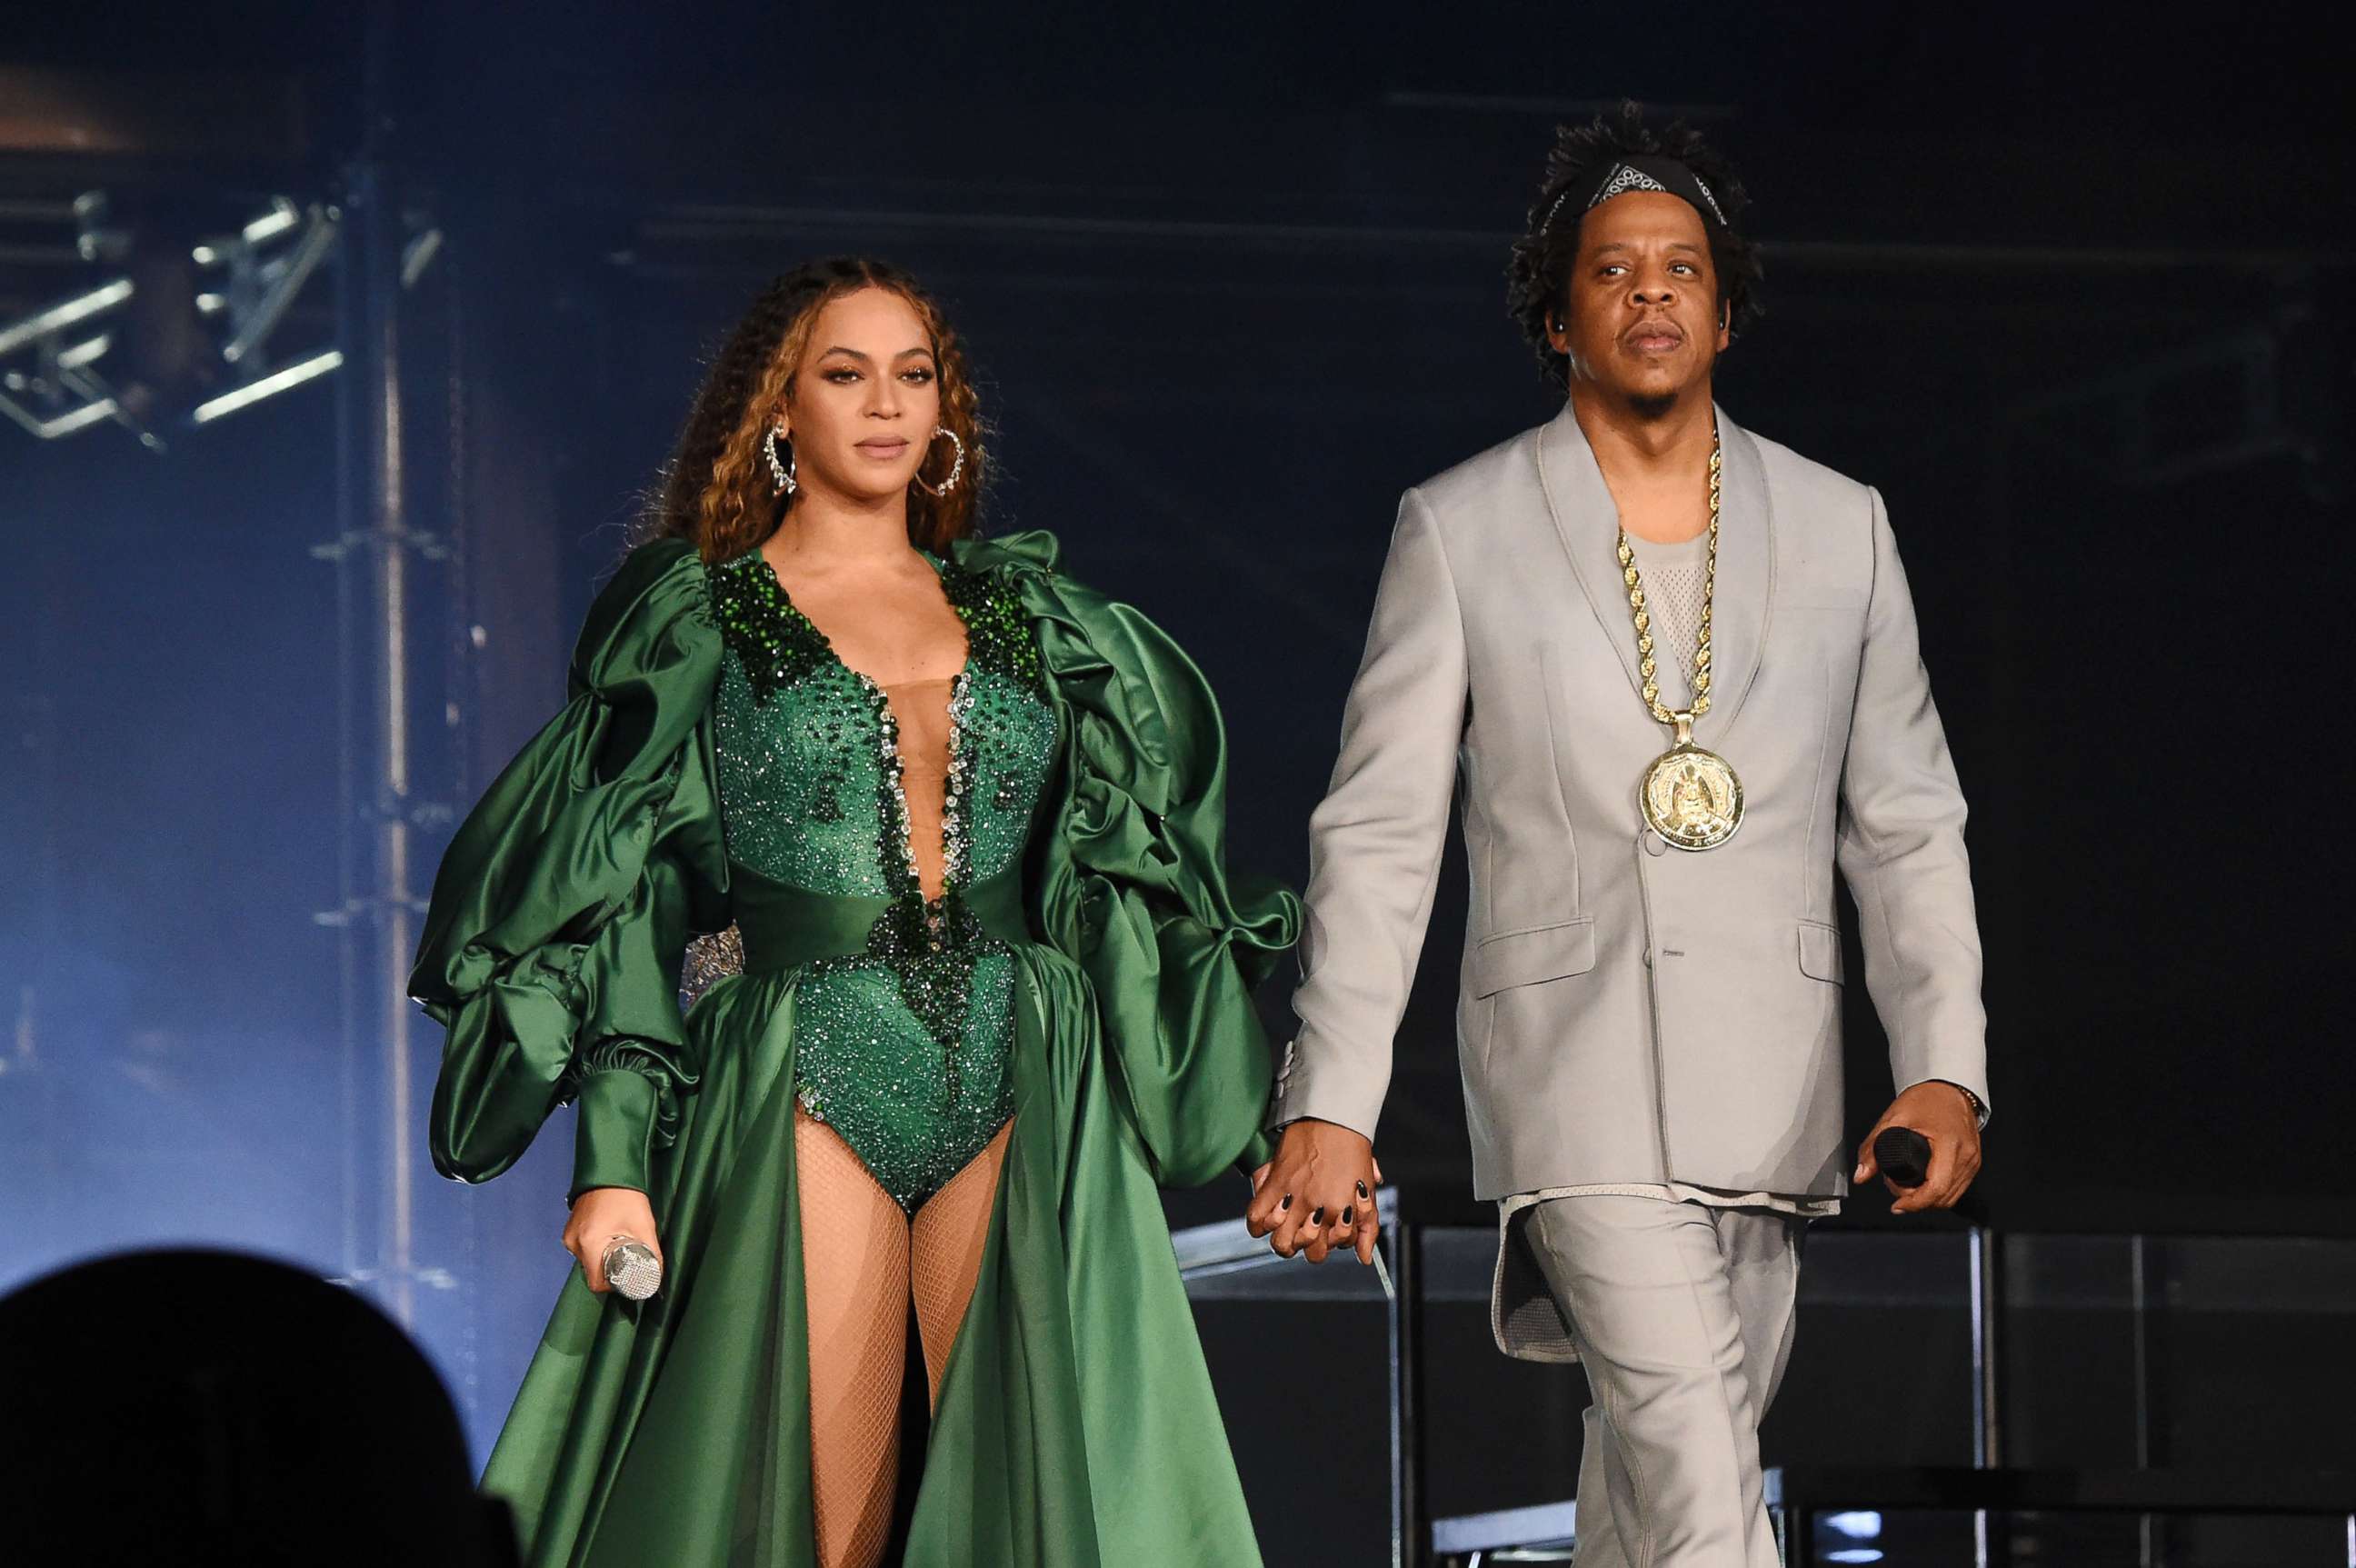 PHOTO: Beyonce and Jay-Z perform during the Global Citizen Festival, Dec. 2, 2018 in Johannesburg, South Africa.